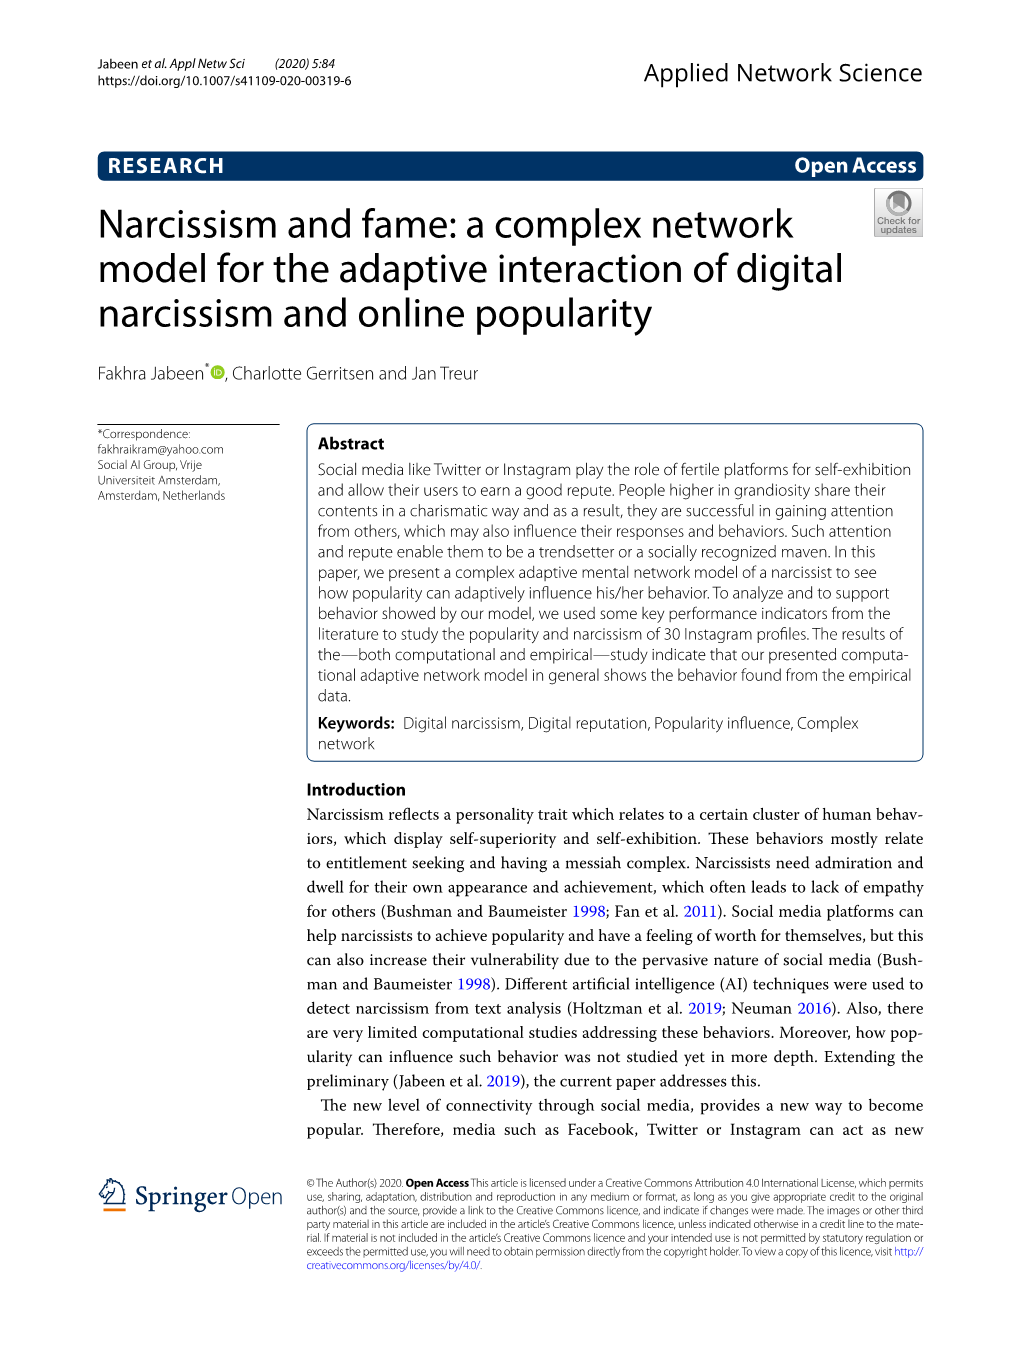 Narcissism and Fame: a Complex Network Model for the Adaptive Interaction of Digital Narcissism and Online Popularity